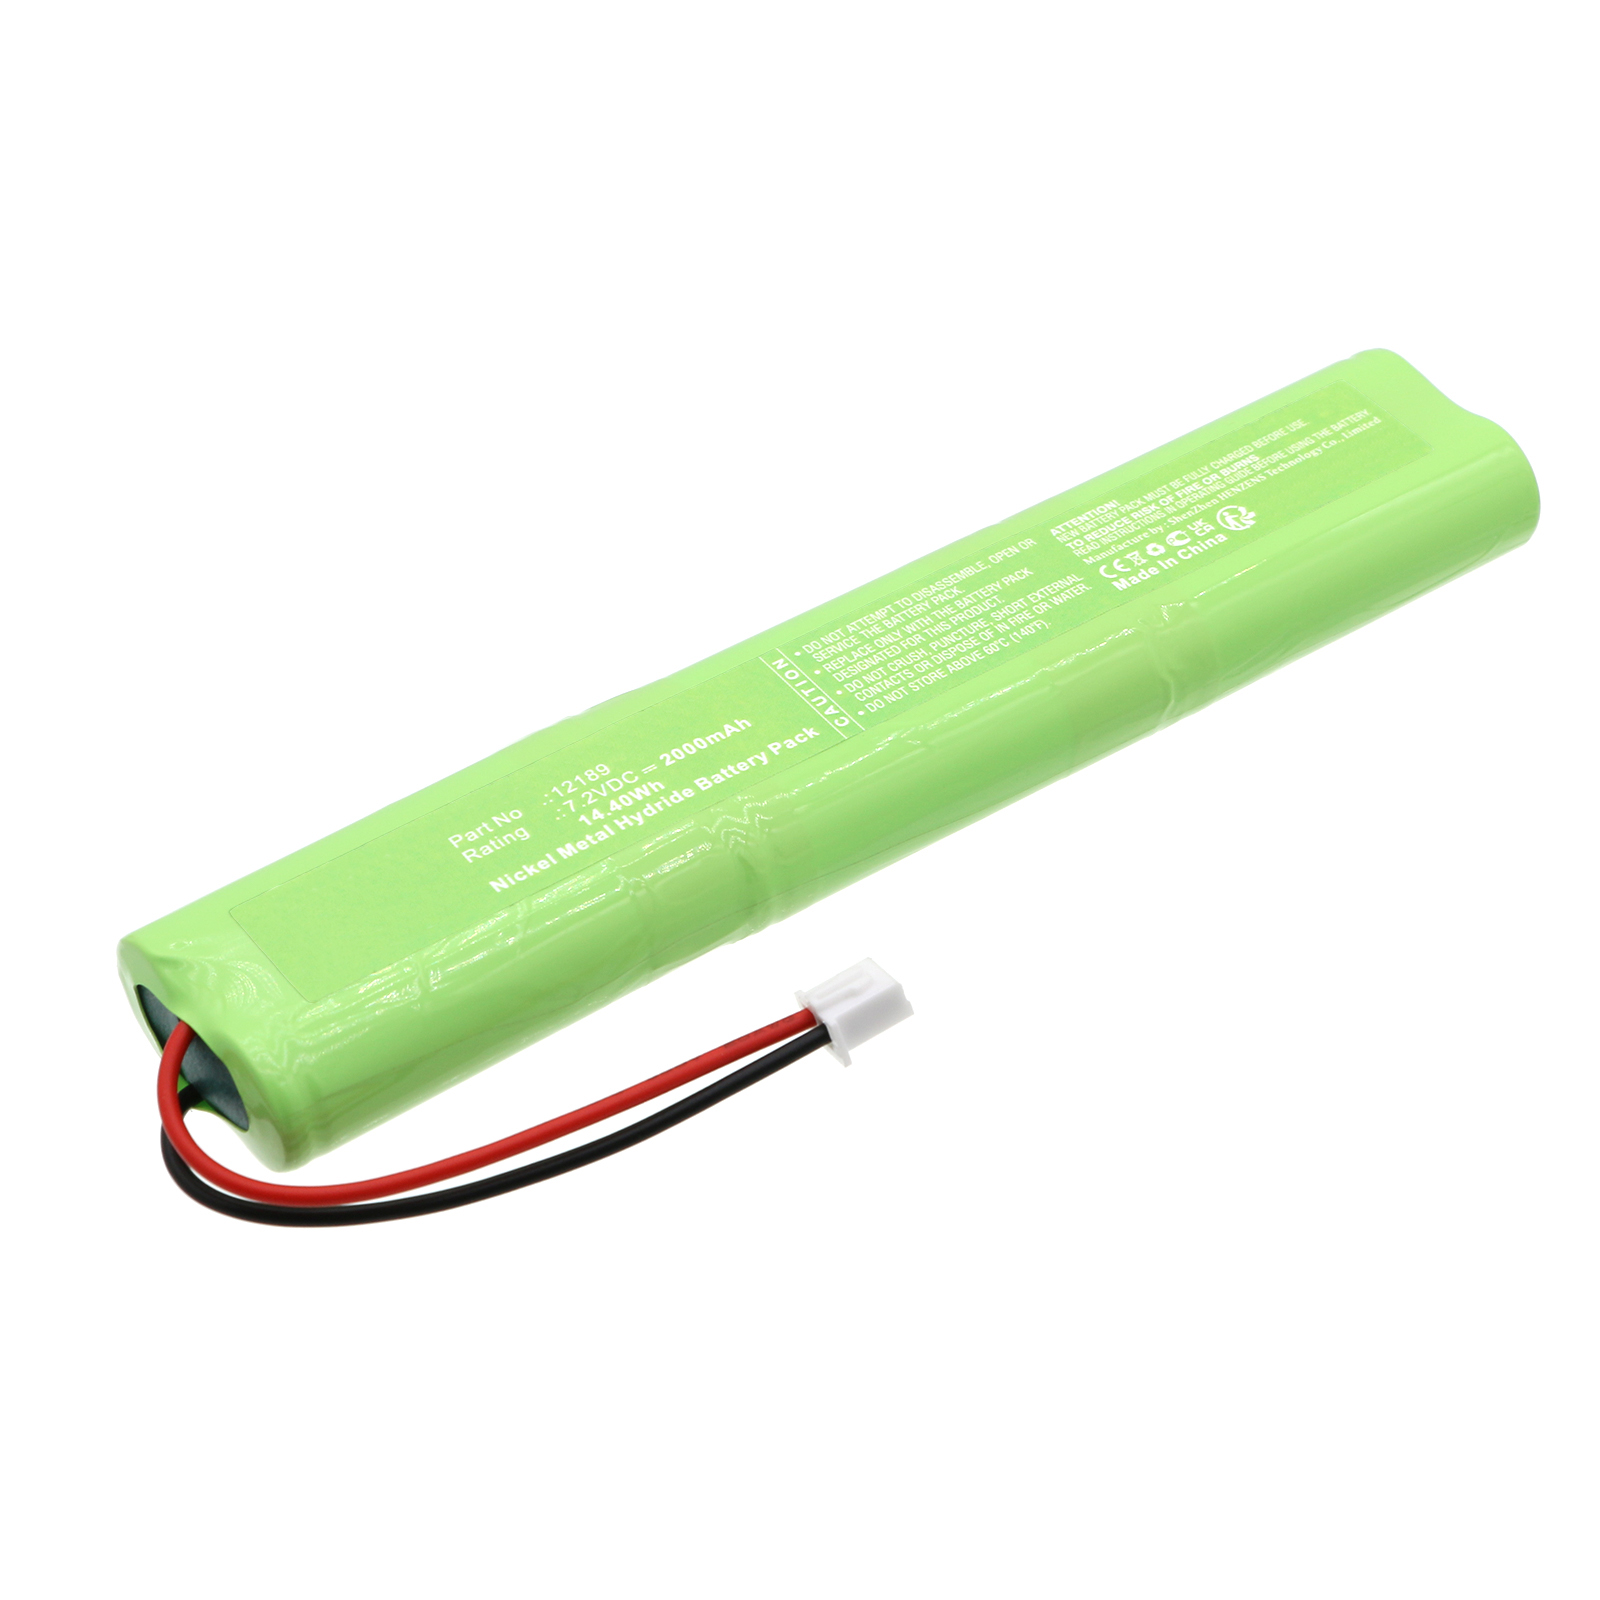 Synergy Digital Security and Safety Battery, Compatible with LUPUS 12189 Security and Safety Battery (Ni-MH, 7.2V, 2000mAh)